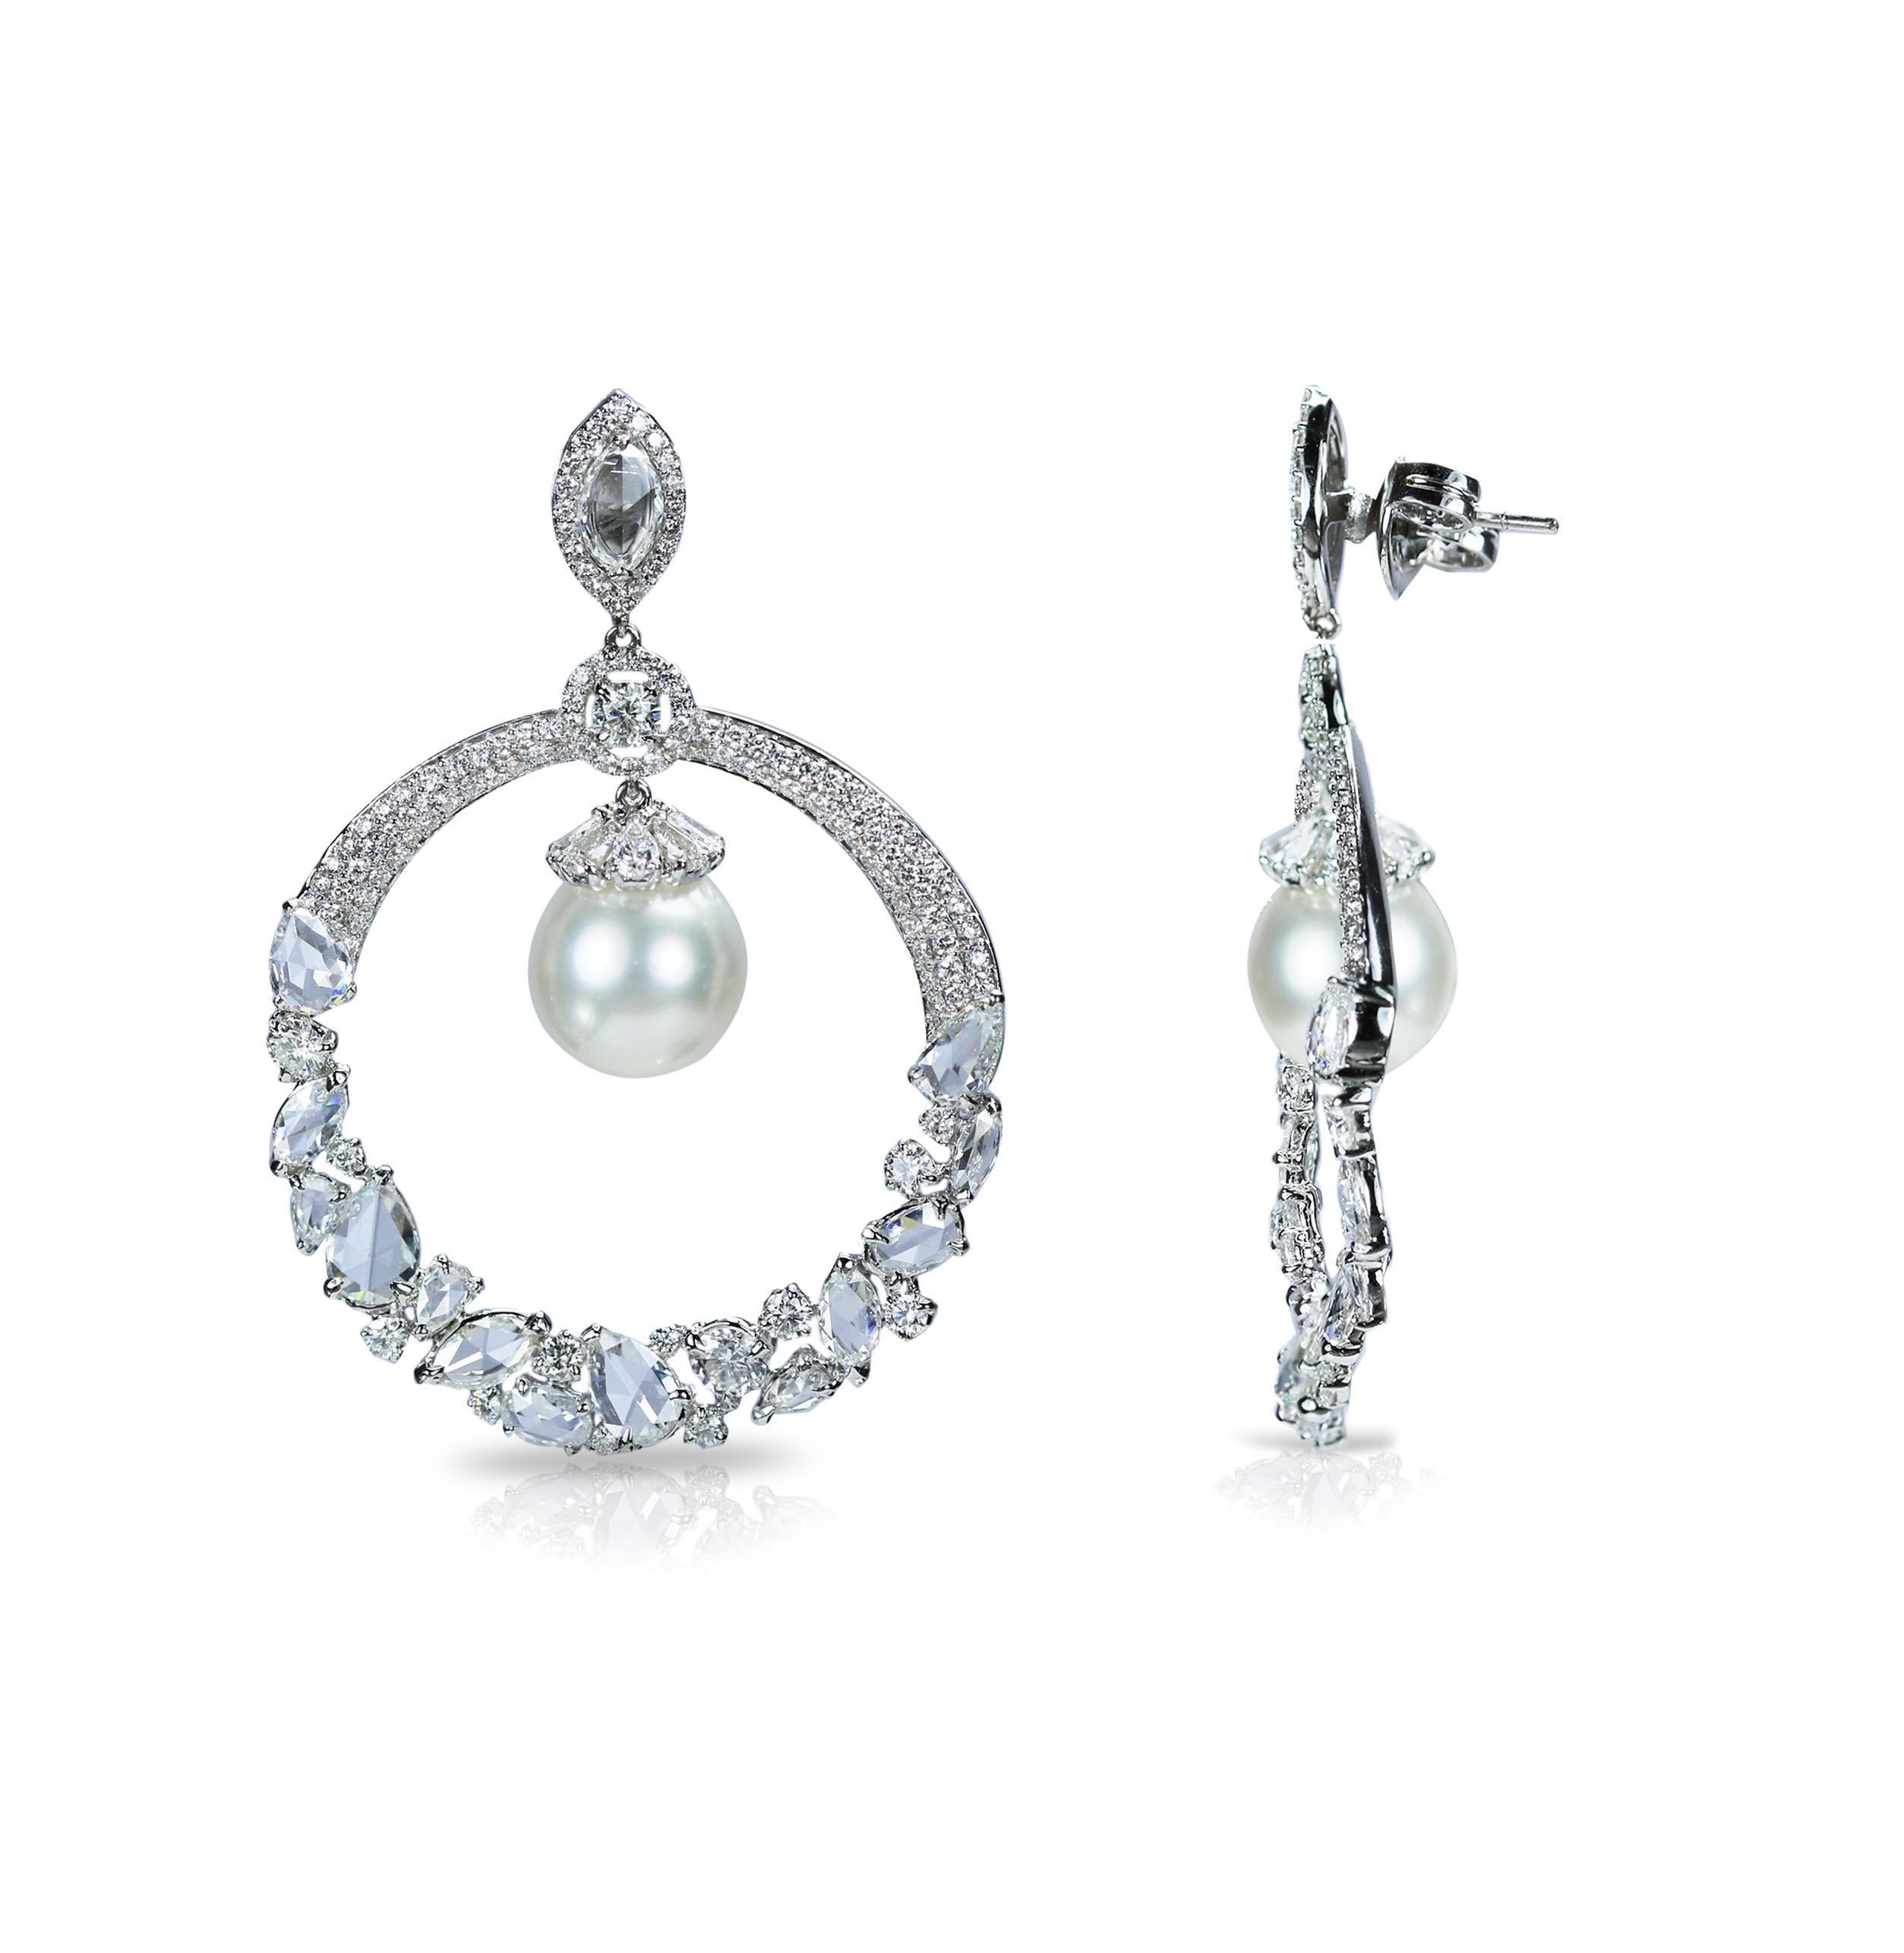 Contemporary Studio Rêves Diamonds and South Sea Pearls Dangling Earrings in 18 Karat Gold For Sale